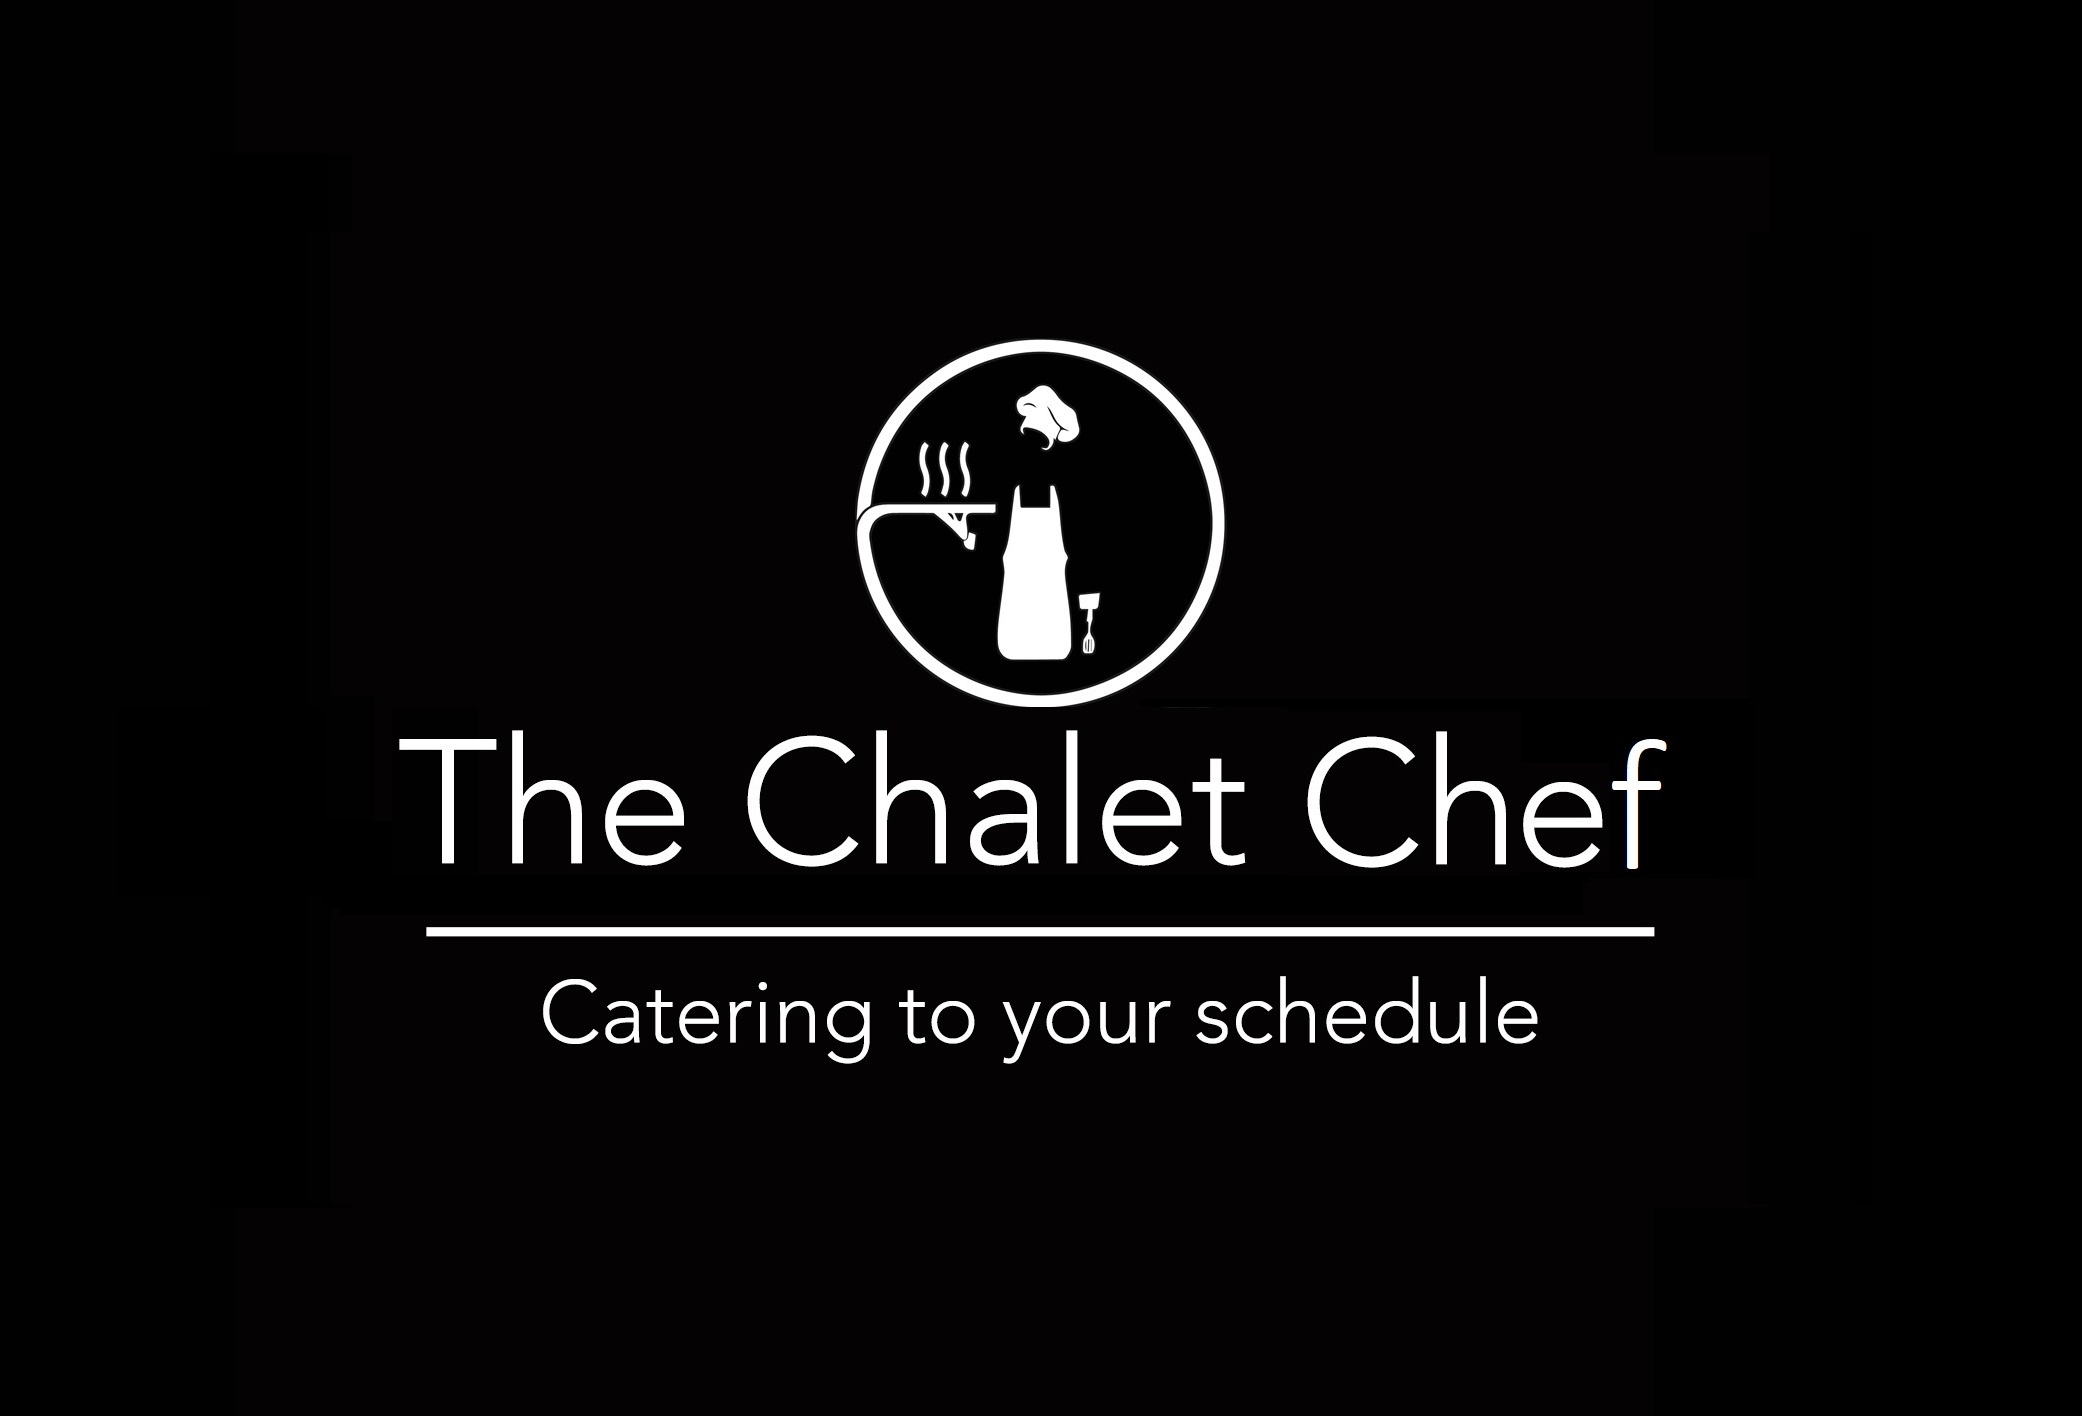 The Chalet Chef